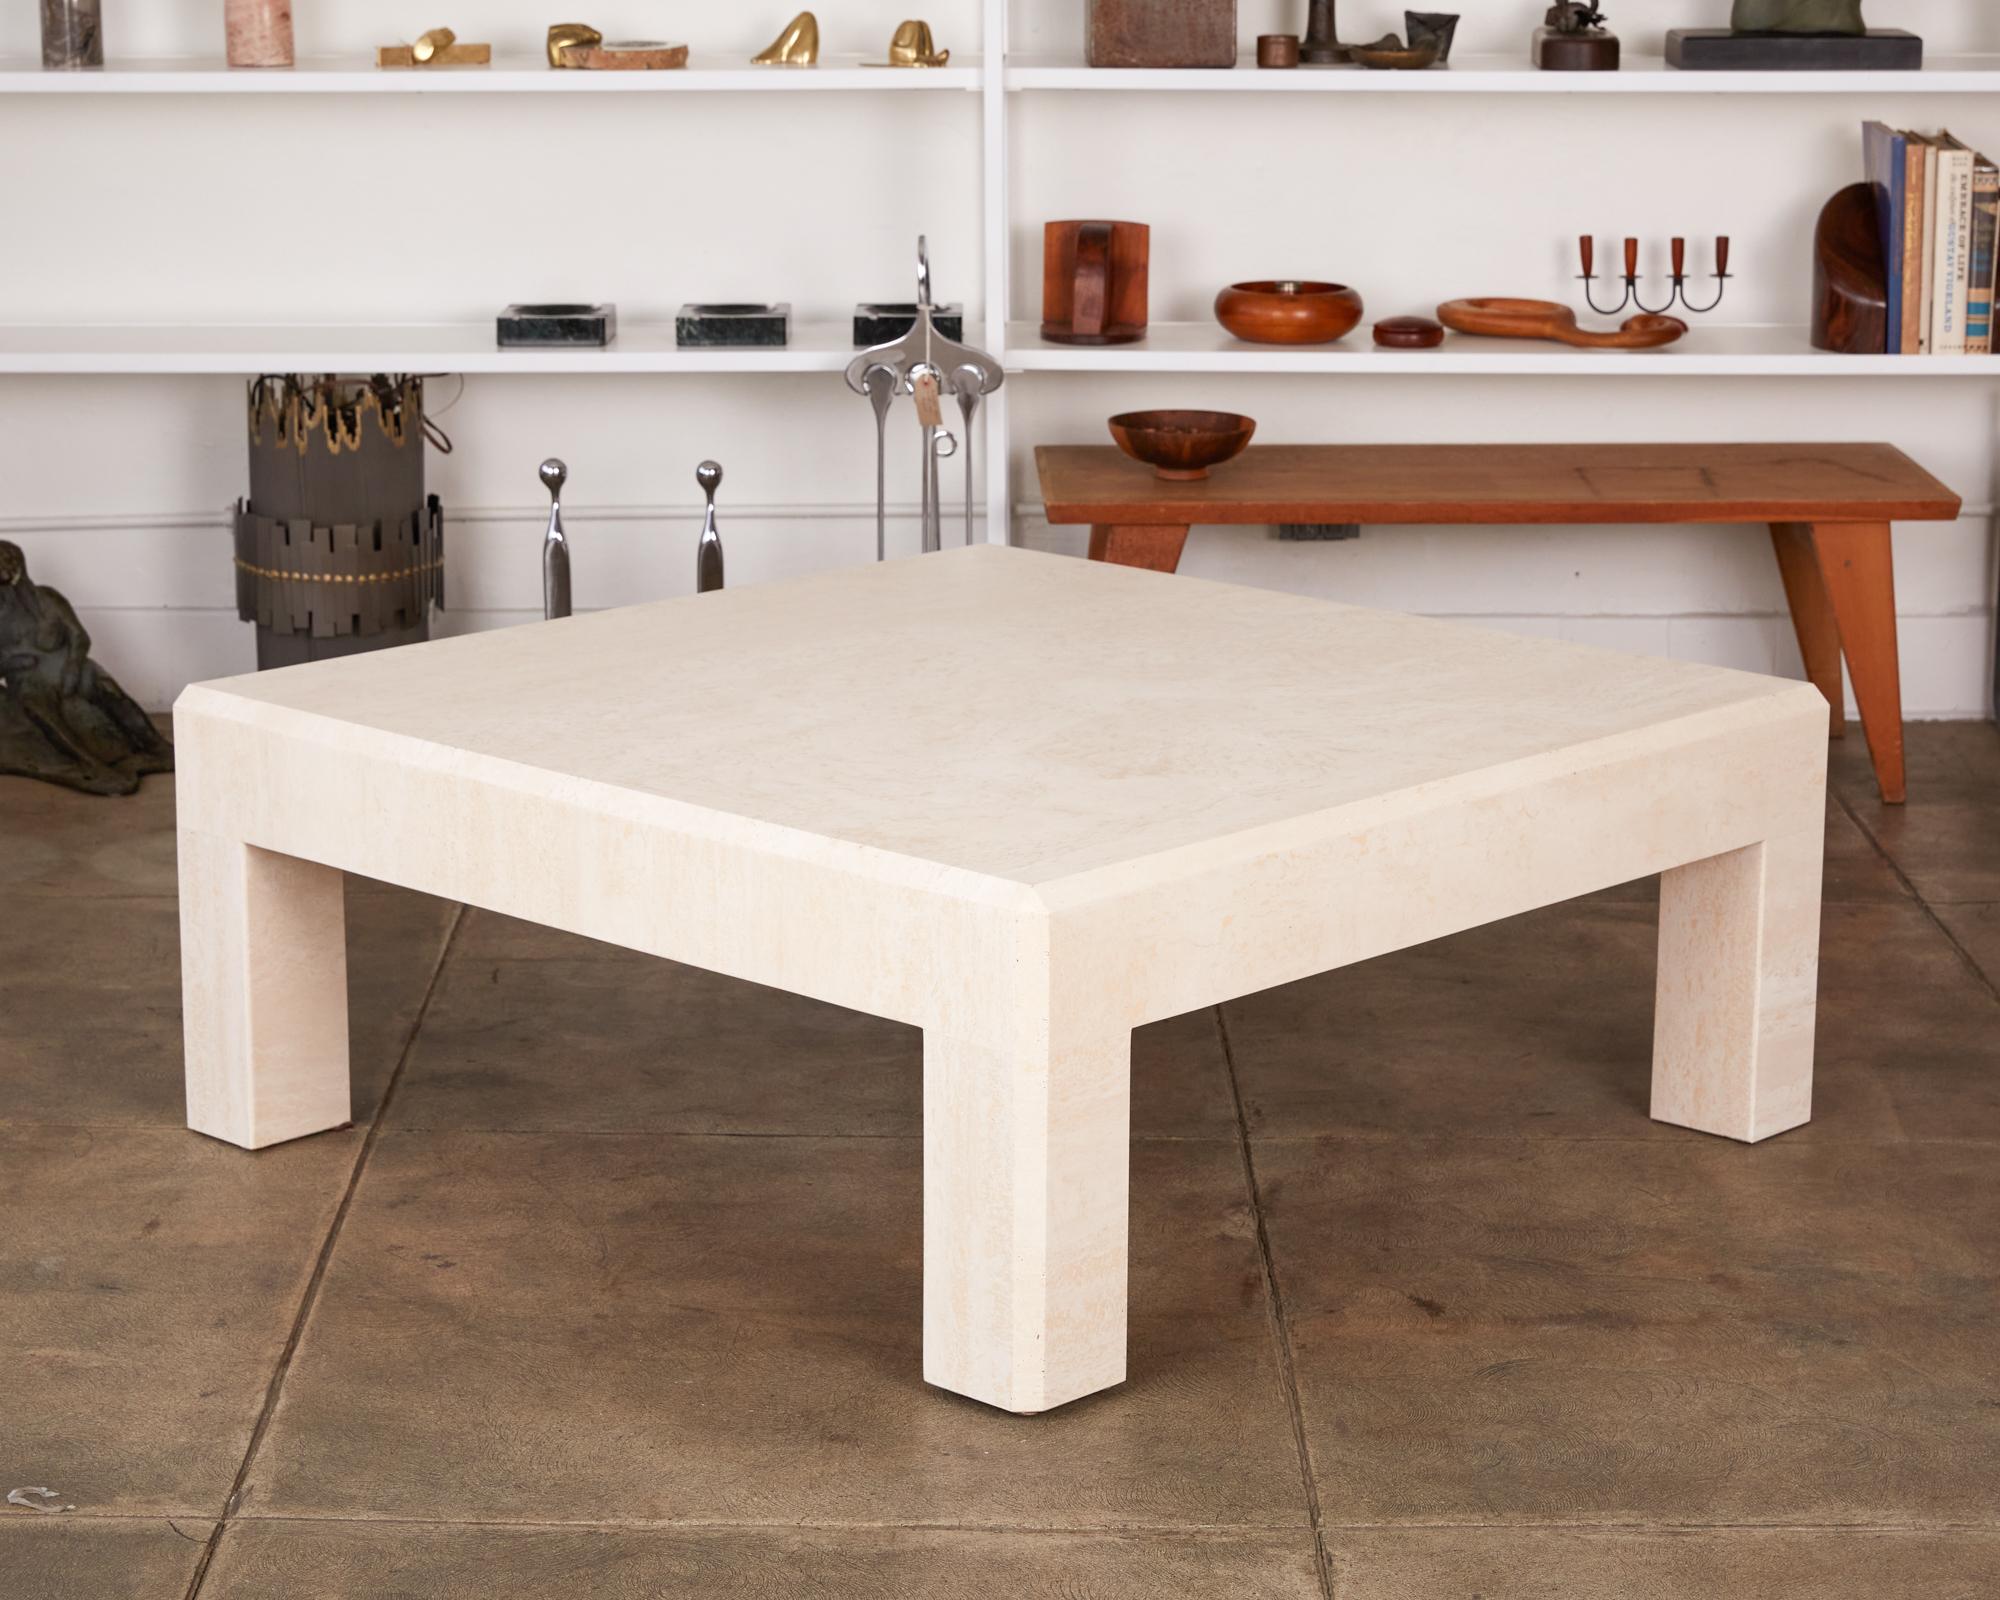 Postmodern travertine coffee table, Italy, circa 1970s. This square table has a thick travertine top, that sits atop four square column legs, featuring a chamfered edge detail. With a sleek shape that is reminiscent of tables designed by Italian